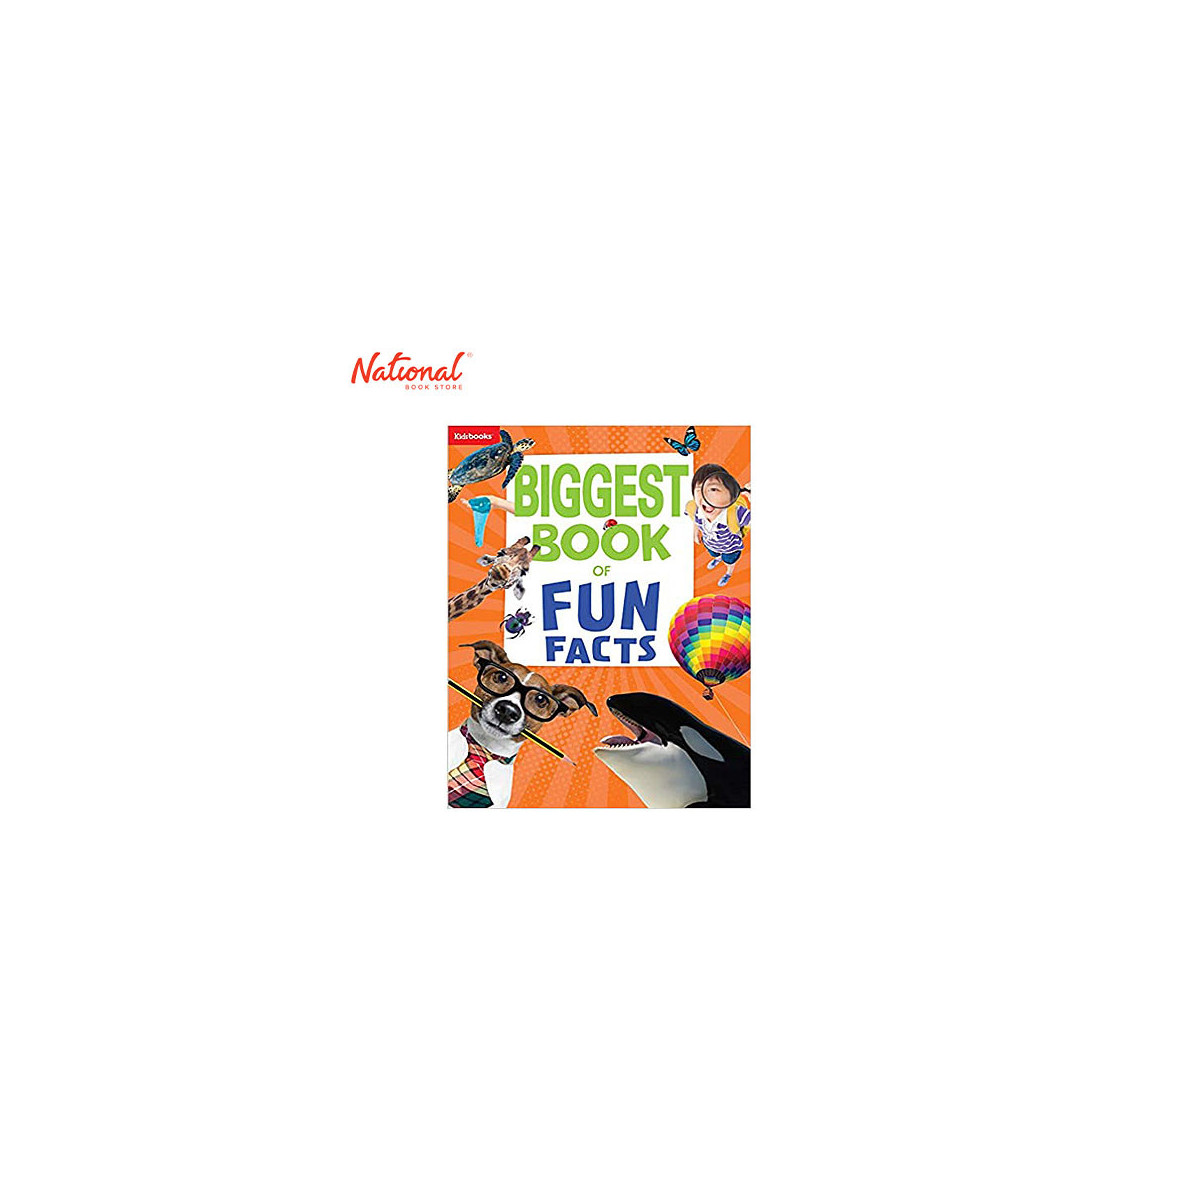 Biggest Book of Fun Facts-Packed with Hundreds of Facts plus Awesome Activities Trade Paperback